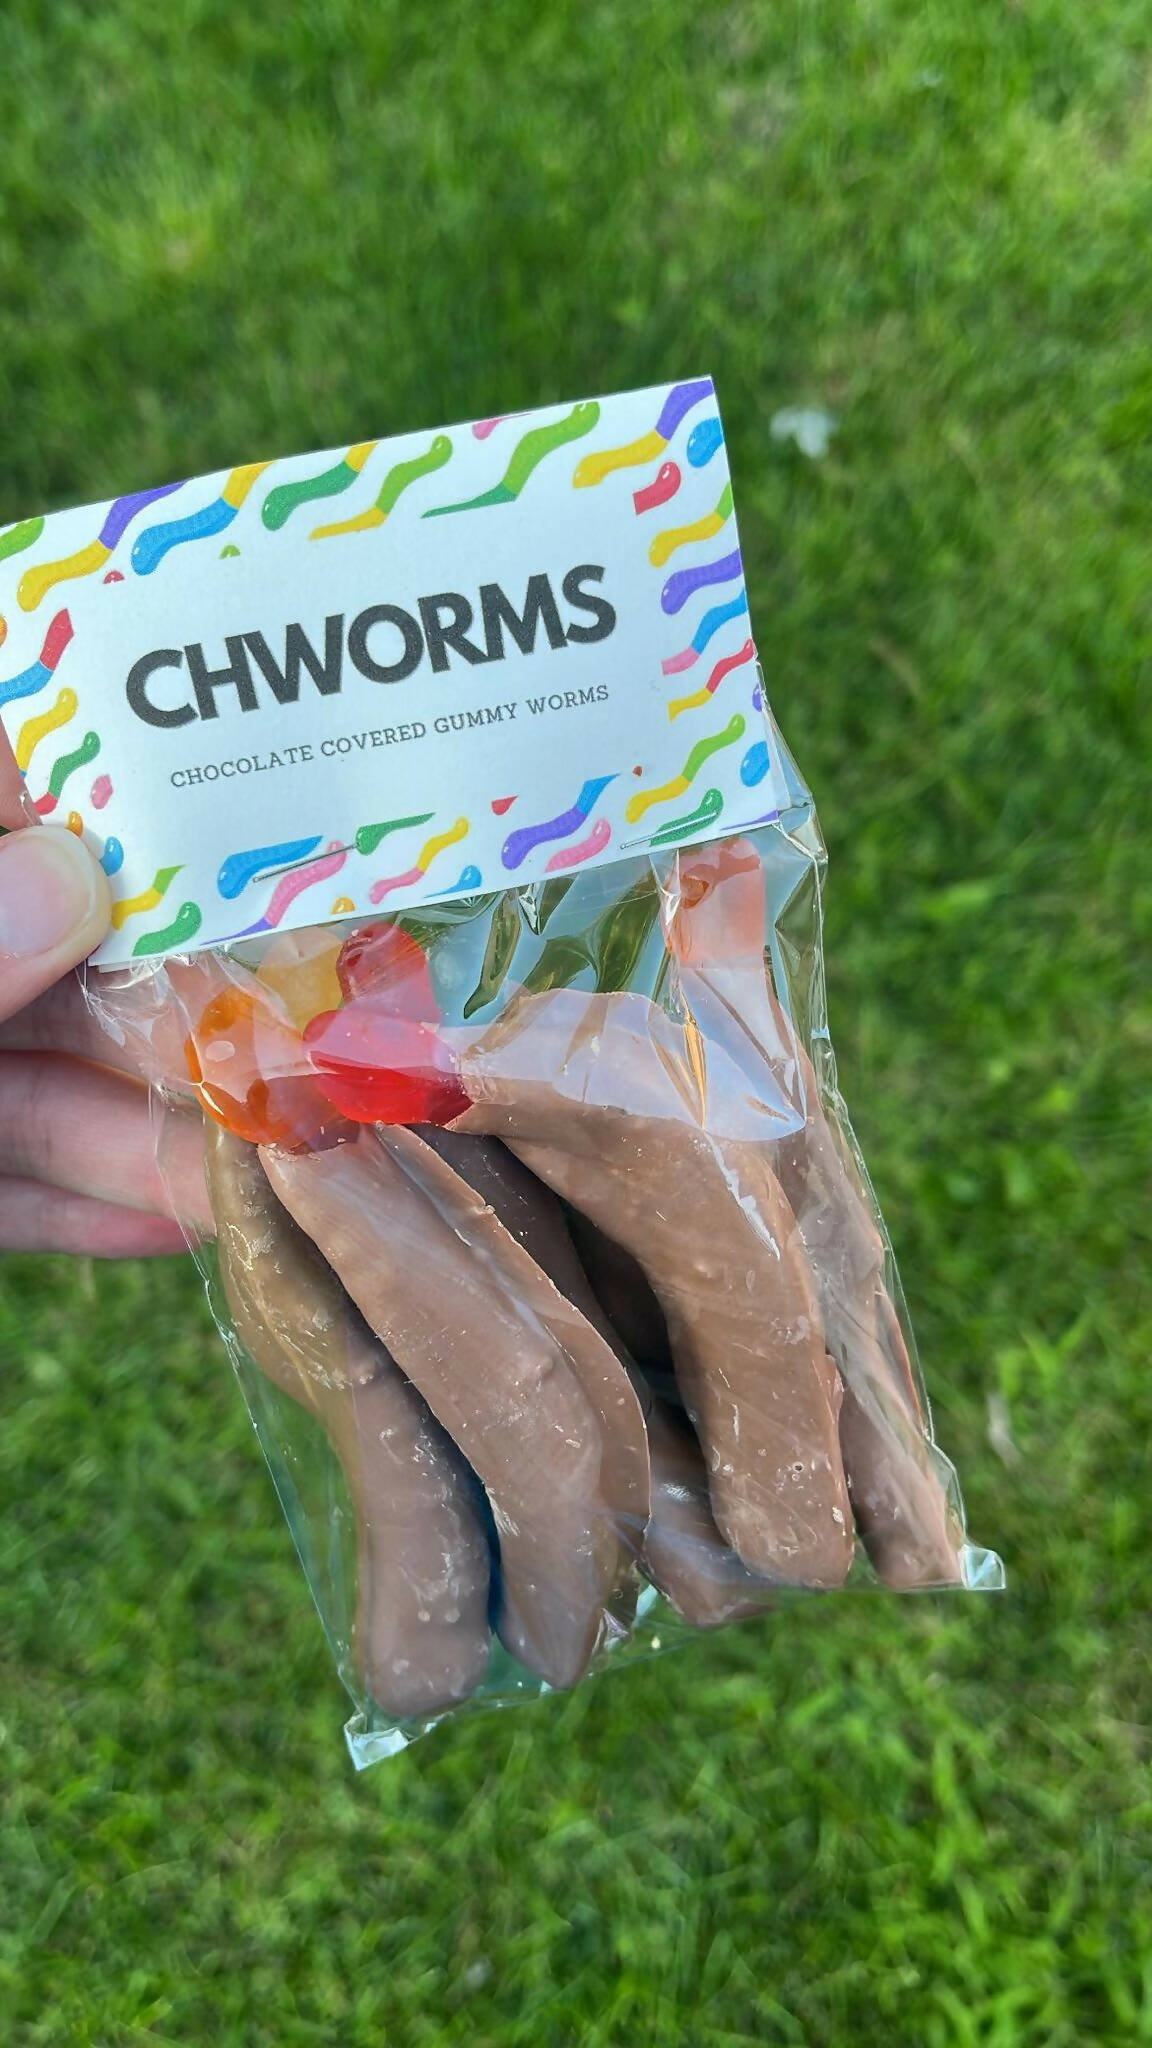 Chworms